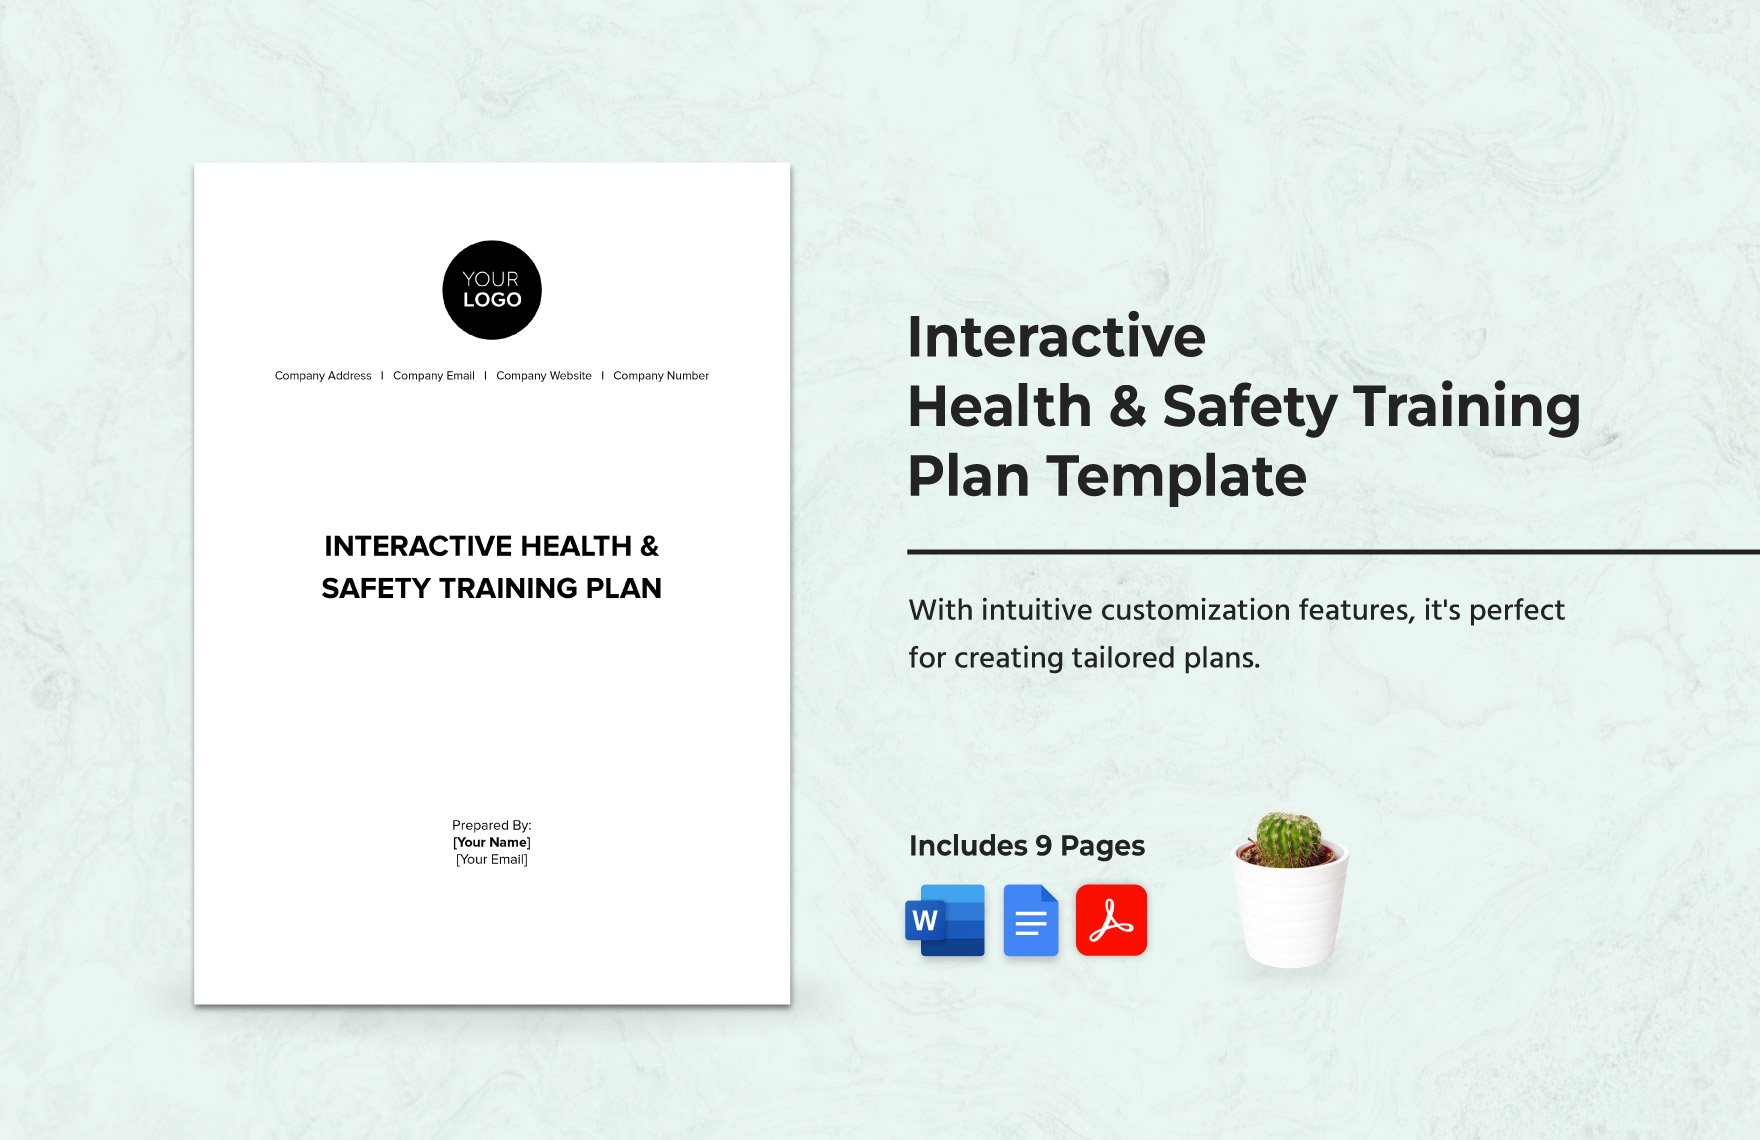 Interactive Health & Safety Training Plan Template in Word, Google Docs, PDF